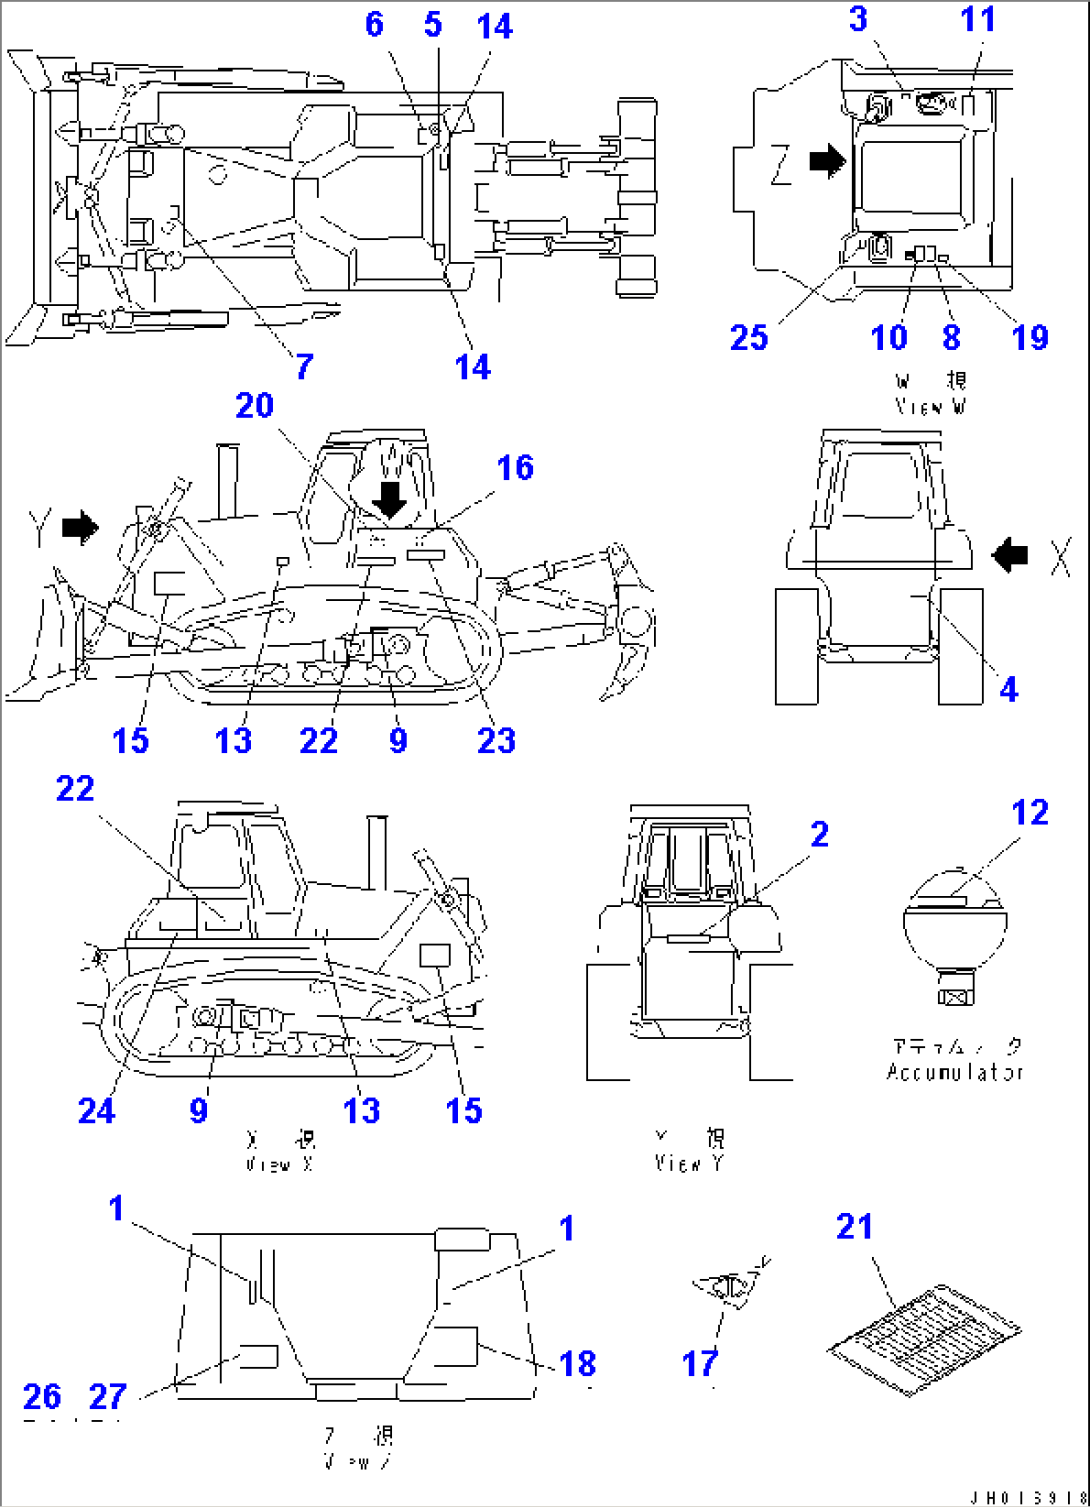 MARKS AND PLATES (CHINESE)